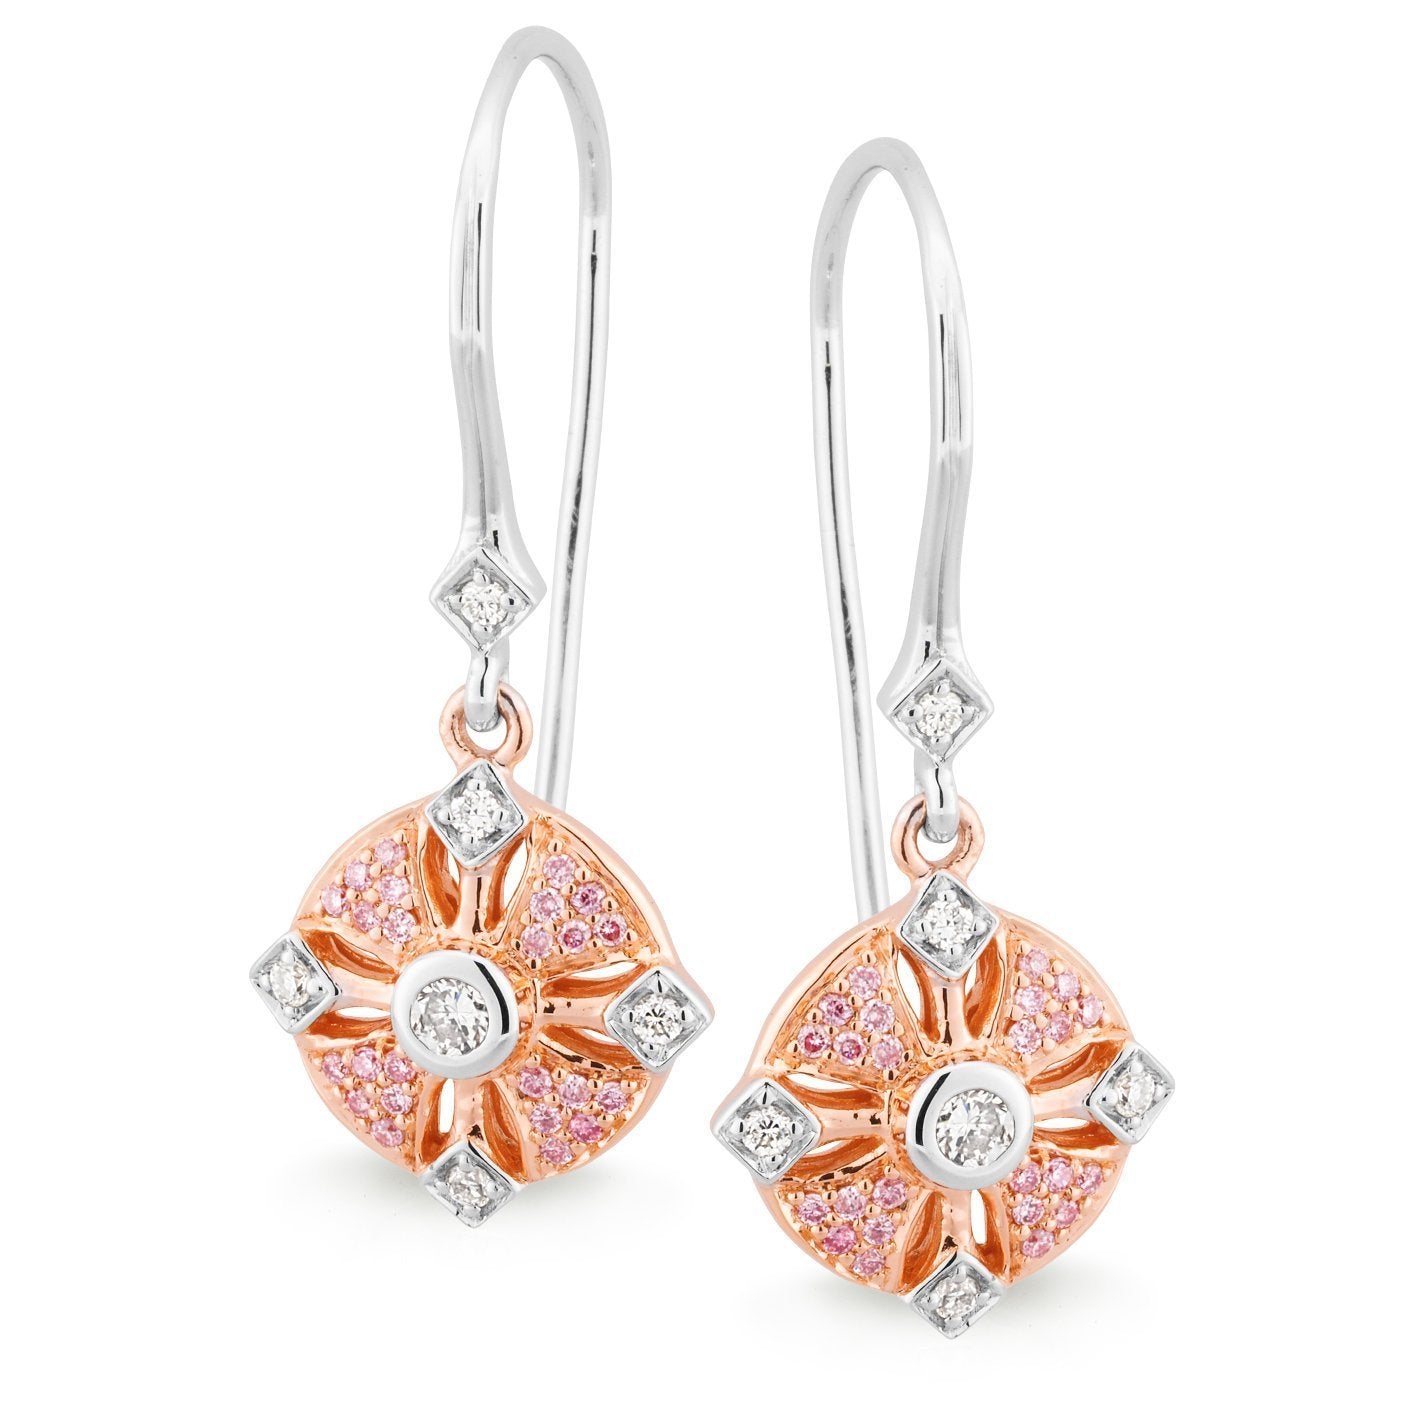 PINK CAVIAR 0.246ct Pink Diamond Earrings in 9ct White & Rose Gold